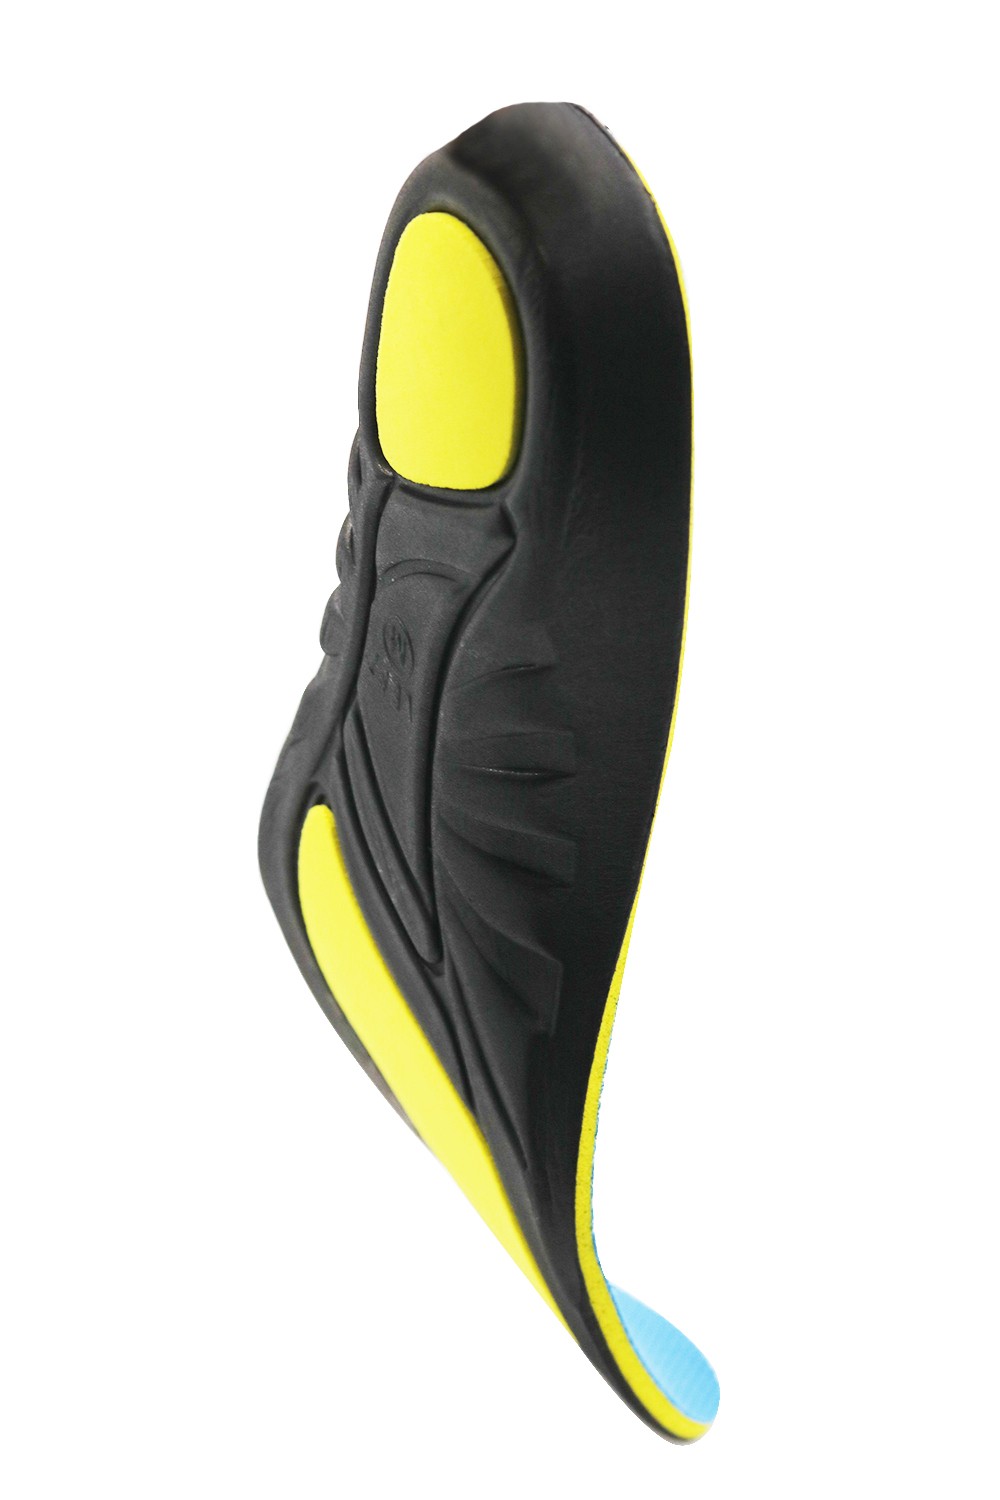 S-King-Best Shoe Insoles, Foot Insoles Price List | S-king-4